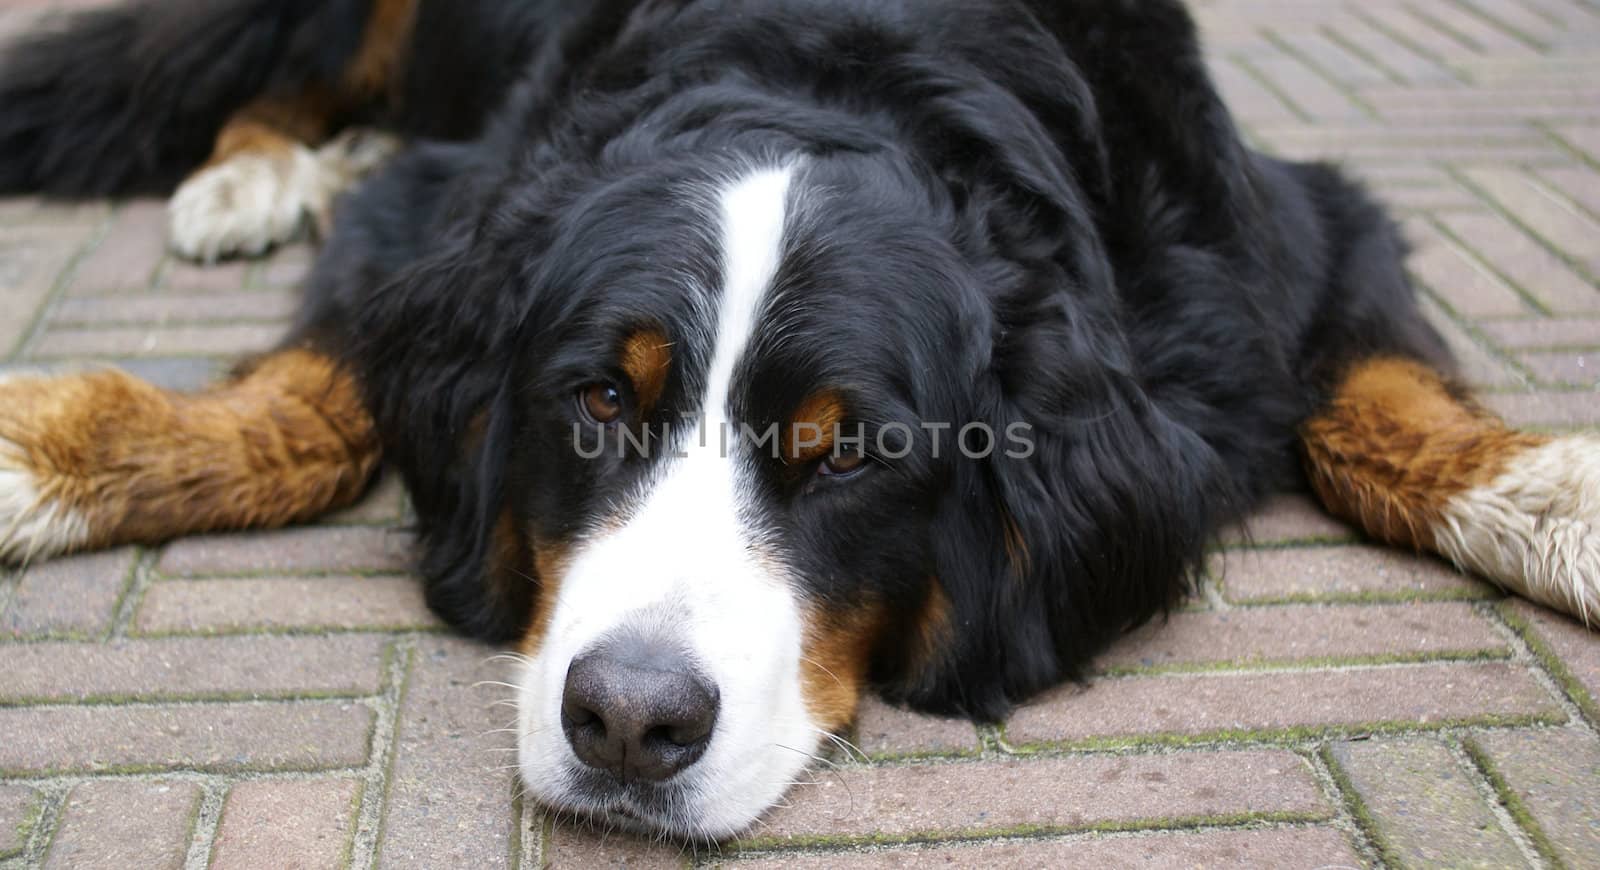 Typical swiss bernese dog, lying down and gazing.